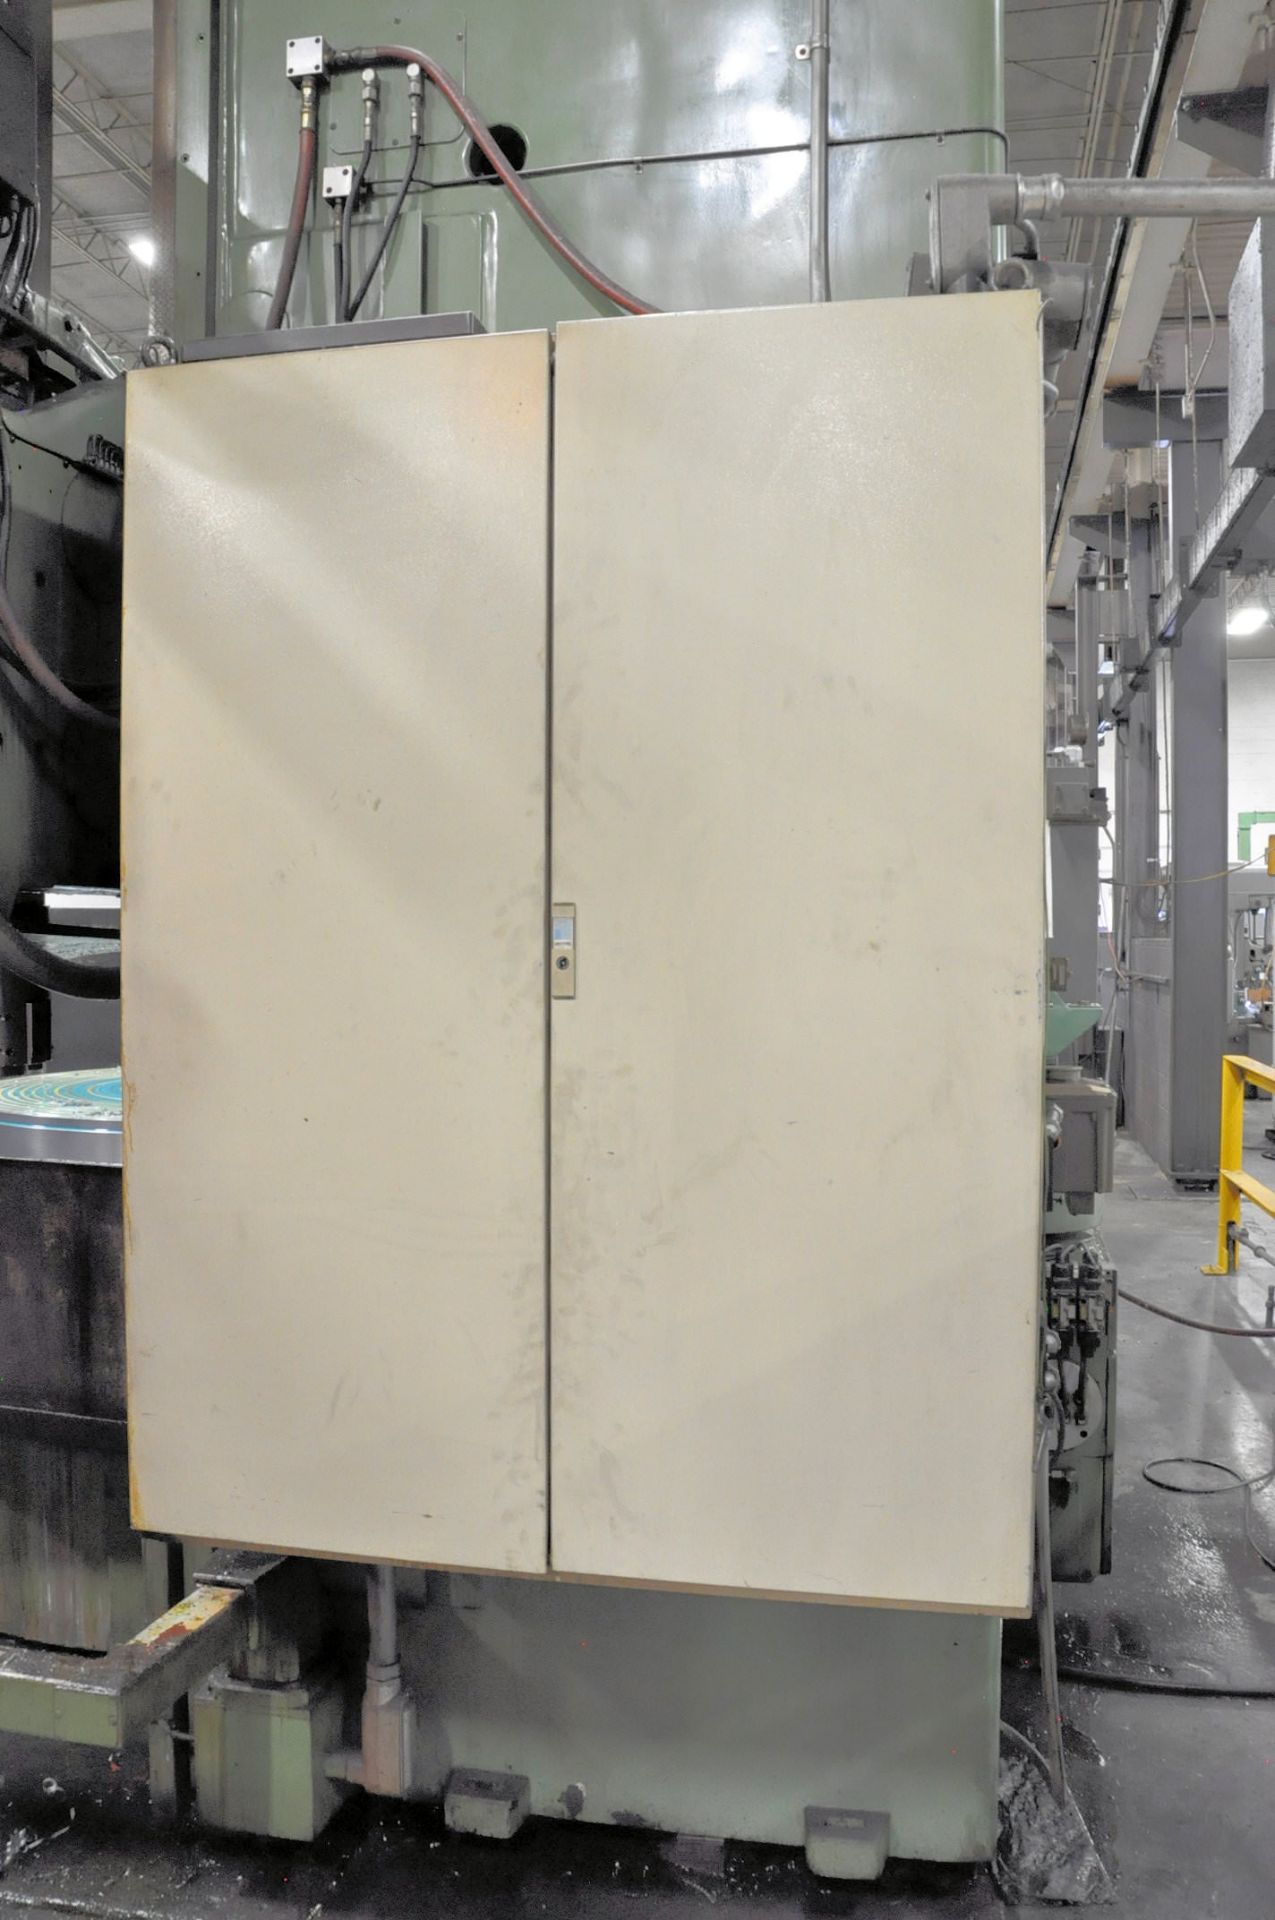 78" Schiess CNC Vertical Boring Mill - Image 9 of 9